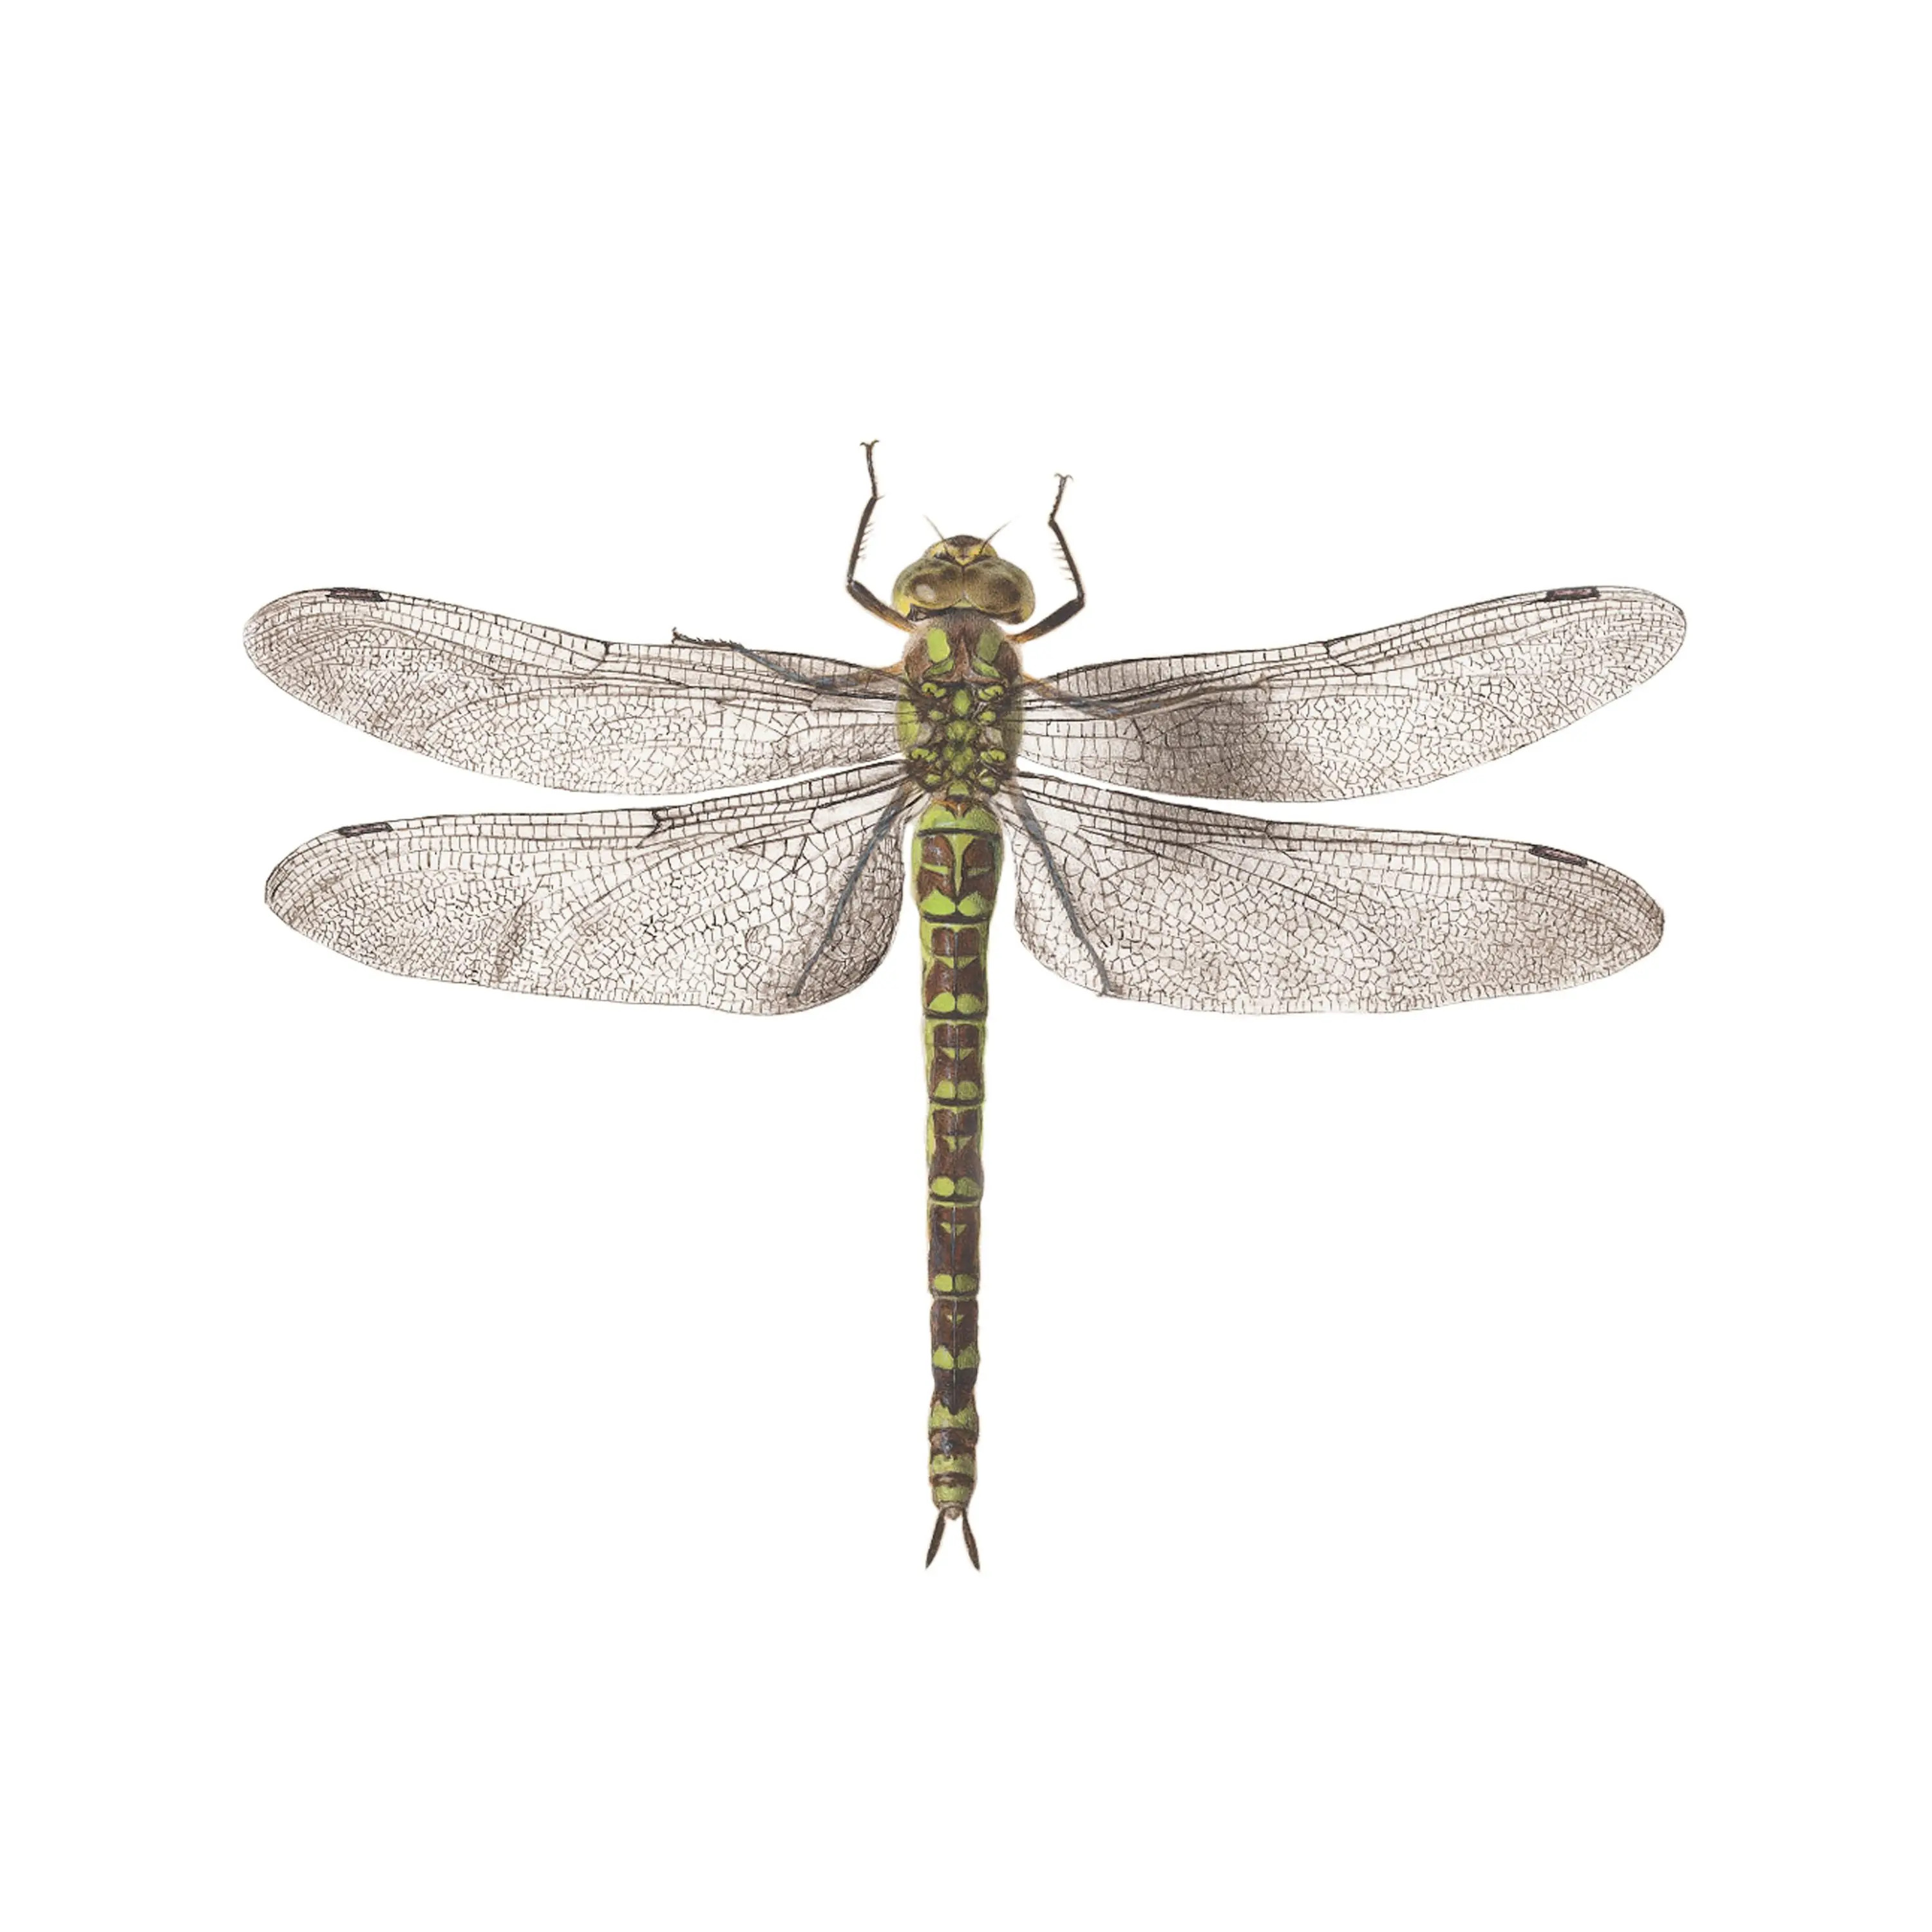 7117 Dragonfly Tattoo Images Stock Photos  Vectors  Shutterstock